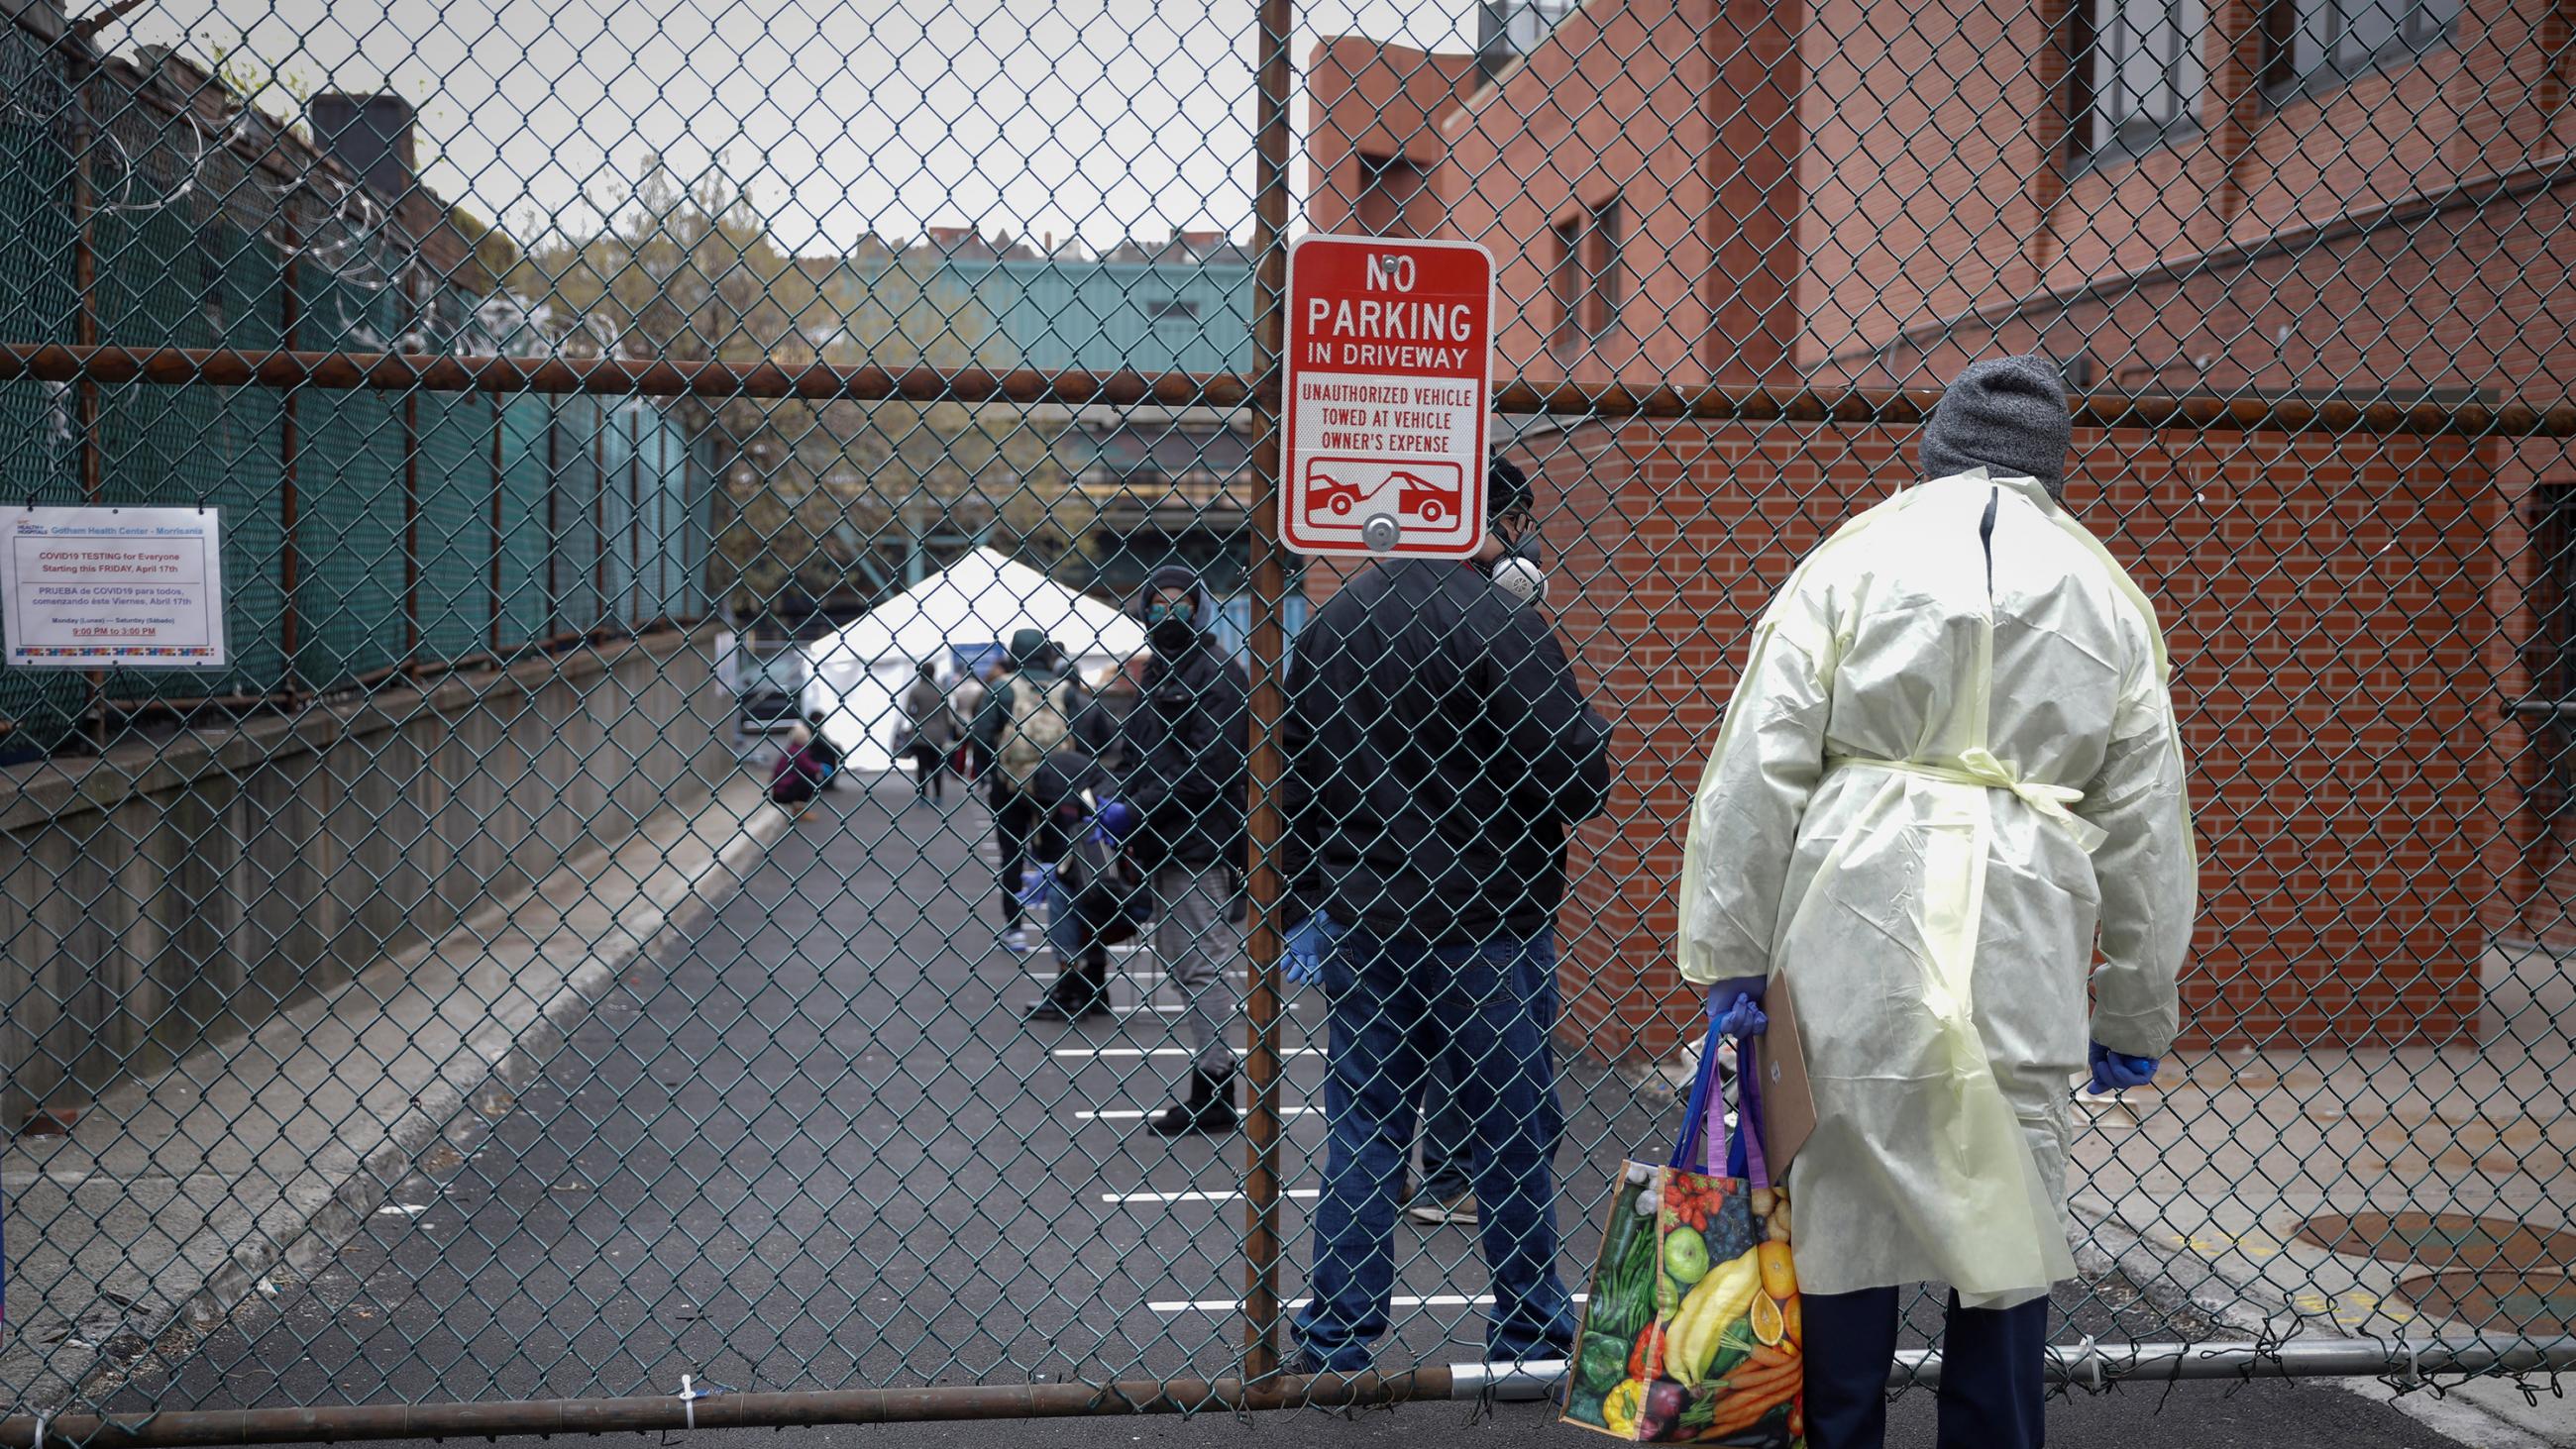 The photo shows a health worker standing behind a fence looking in on an enclosed parking lot where people are lined up awaiting testing. 